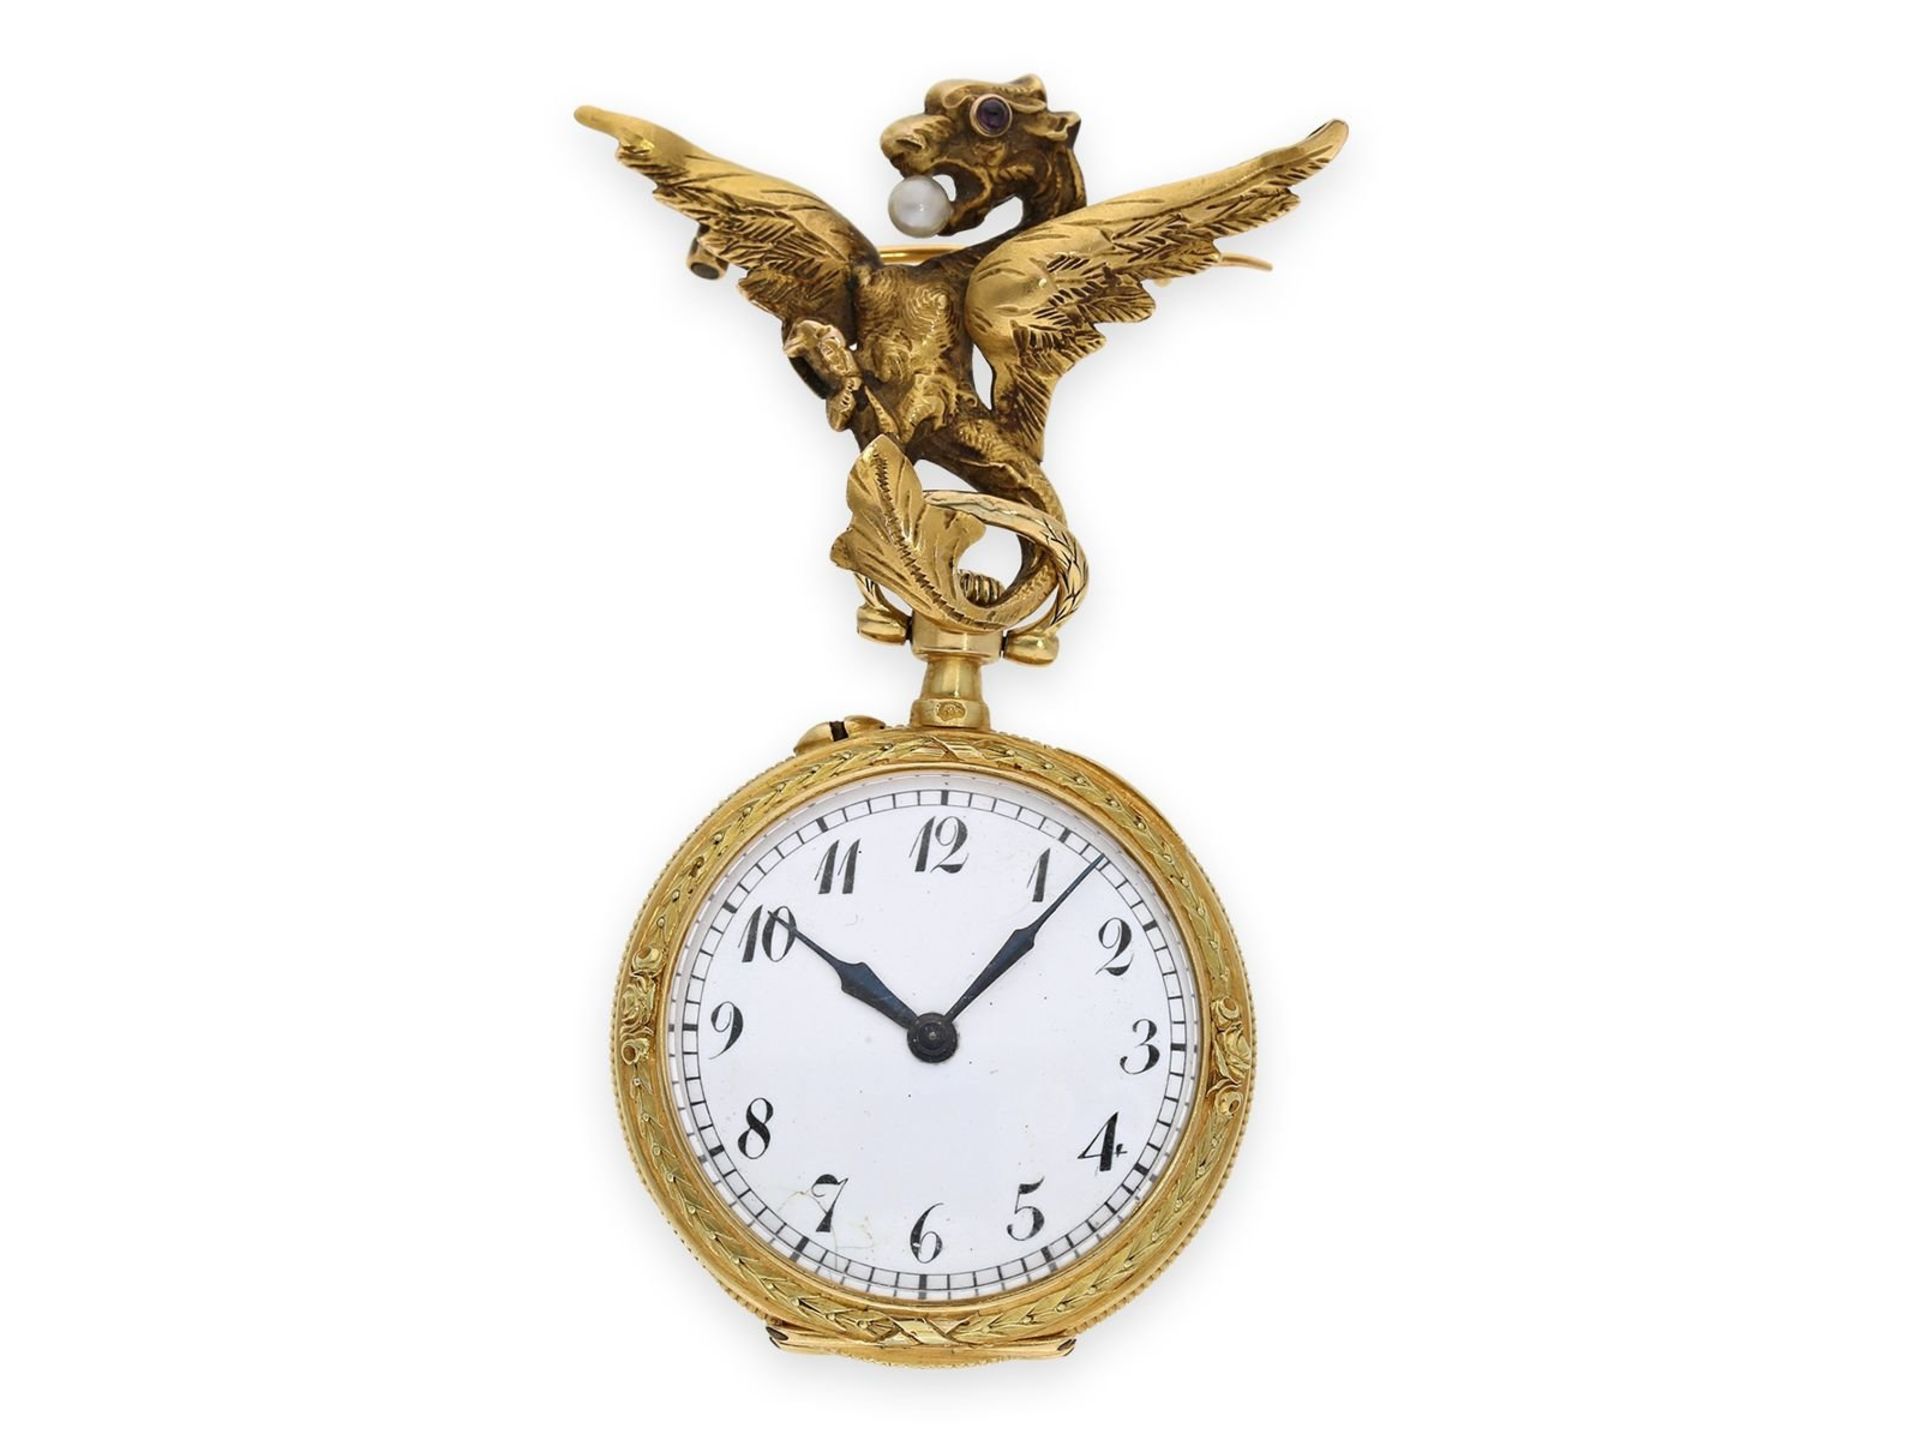 Pocket watch/ pendant watch: extremely rare early Le Coultre Art Nouveau watch with dragon brooch,